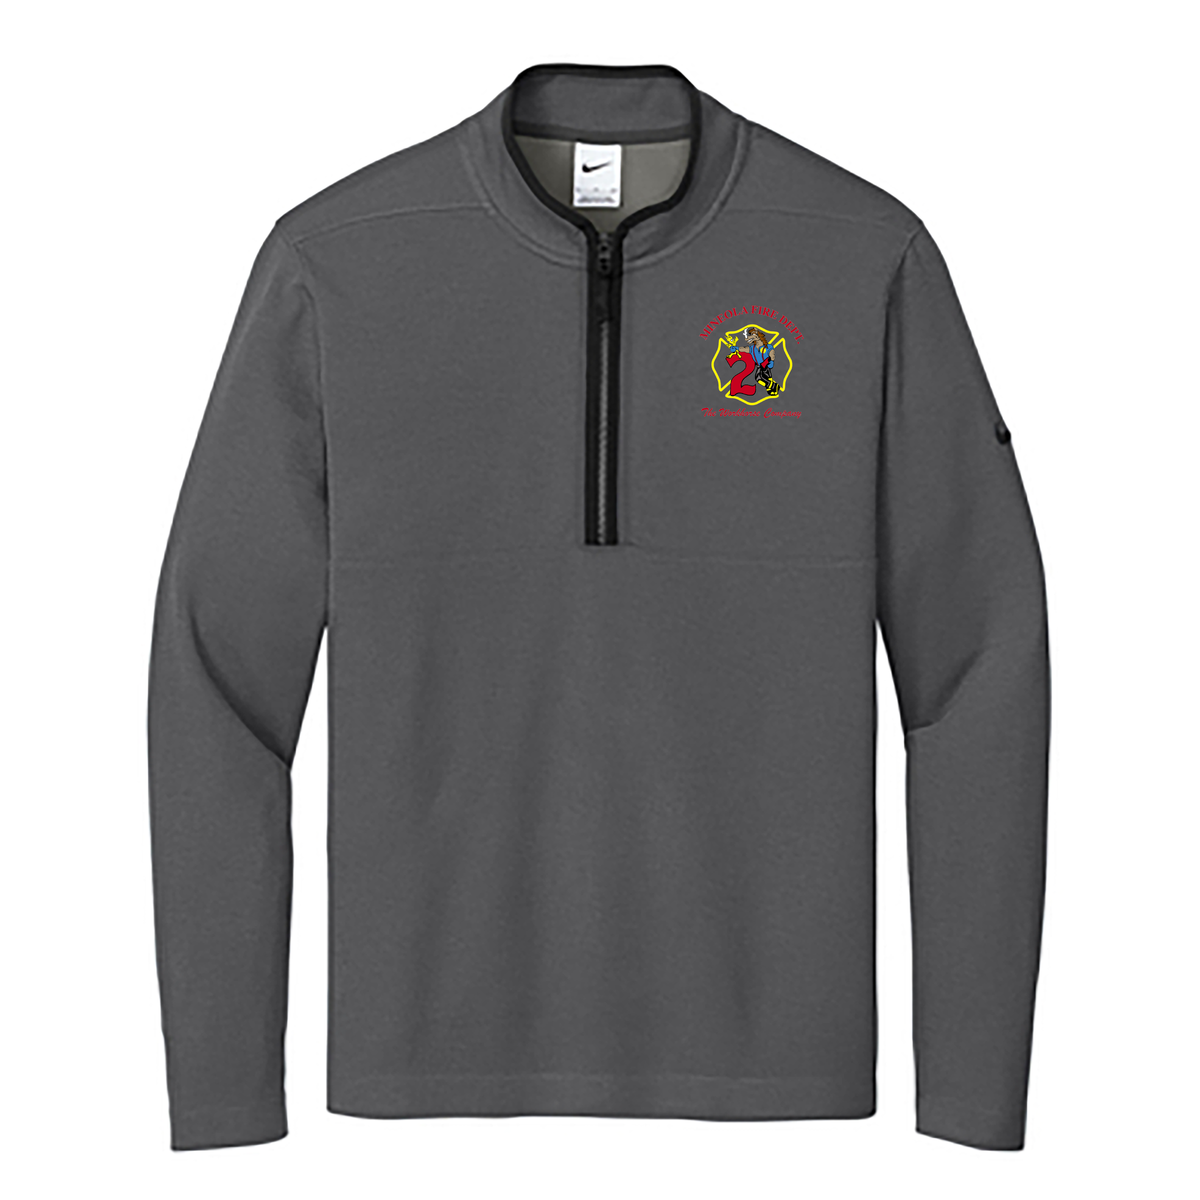 Mineola Fire Dept. Nike Textured 1/2-Zip Cover-Up